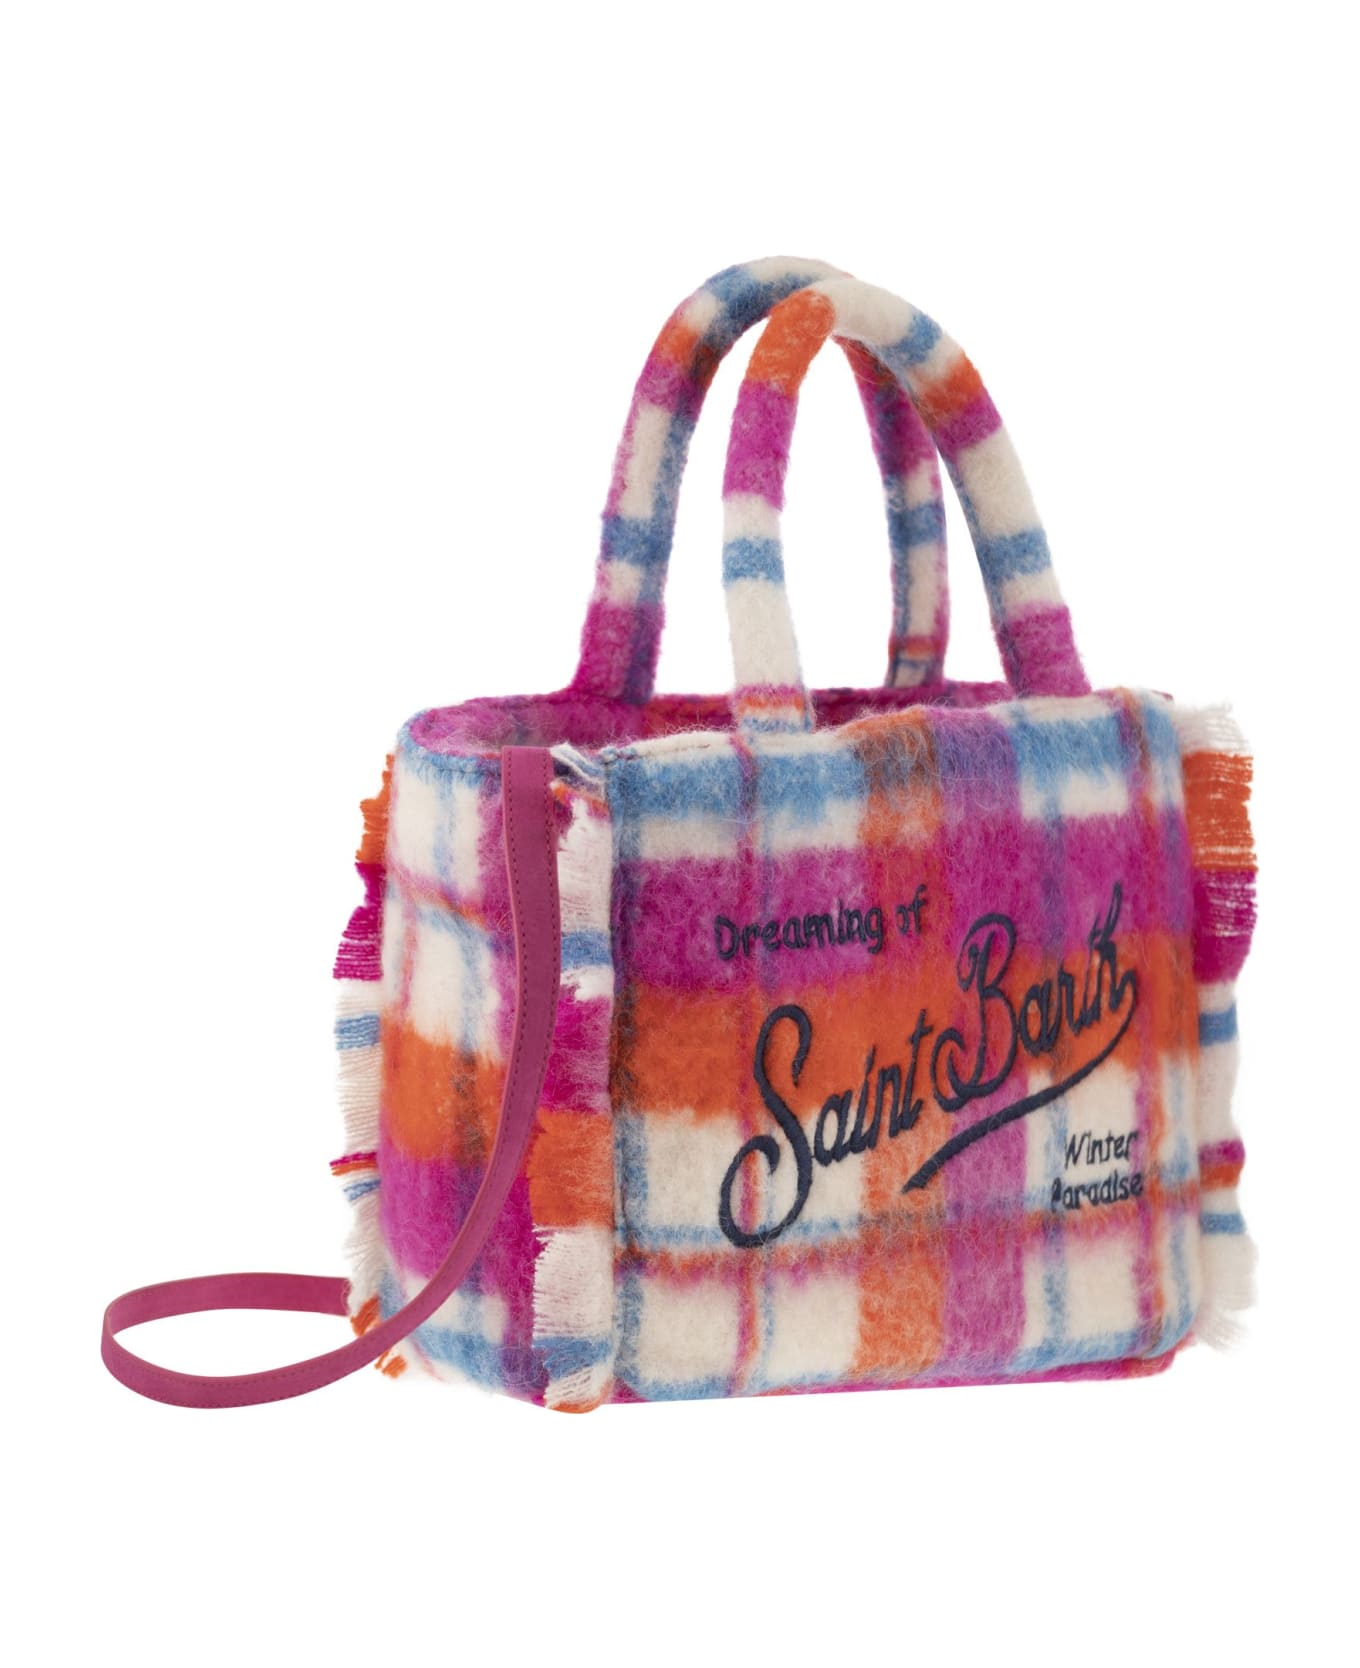 MC2 Saint Barth Wooly Colette Handbag With Fringes And Tartan Pattern - Multicolor